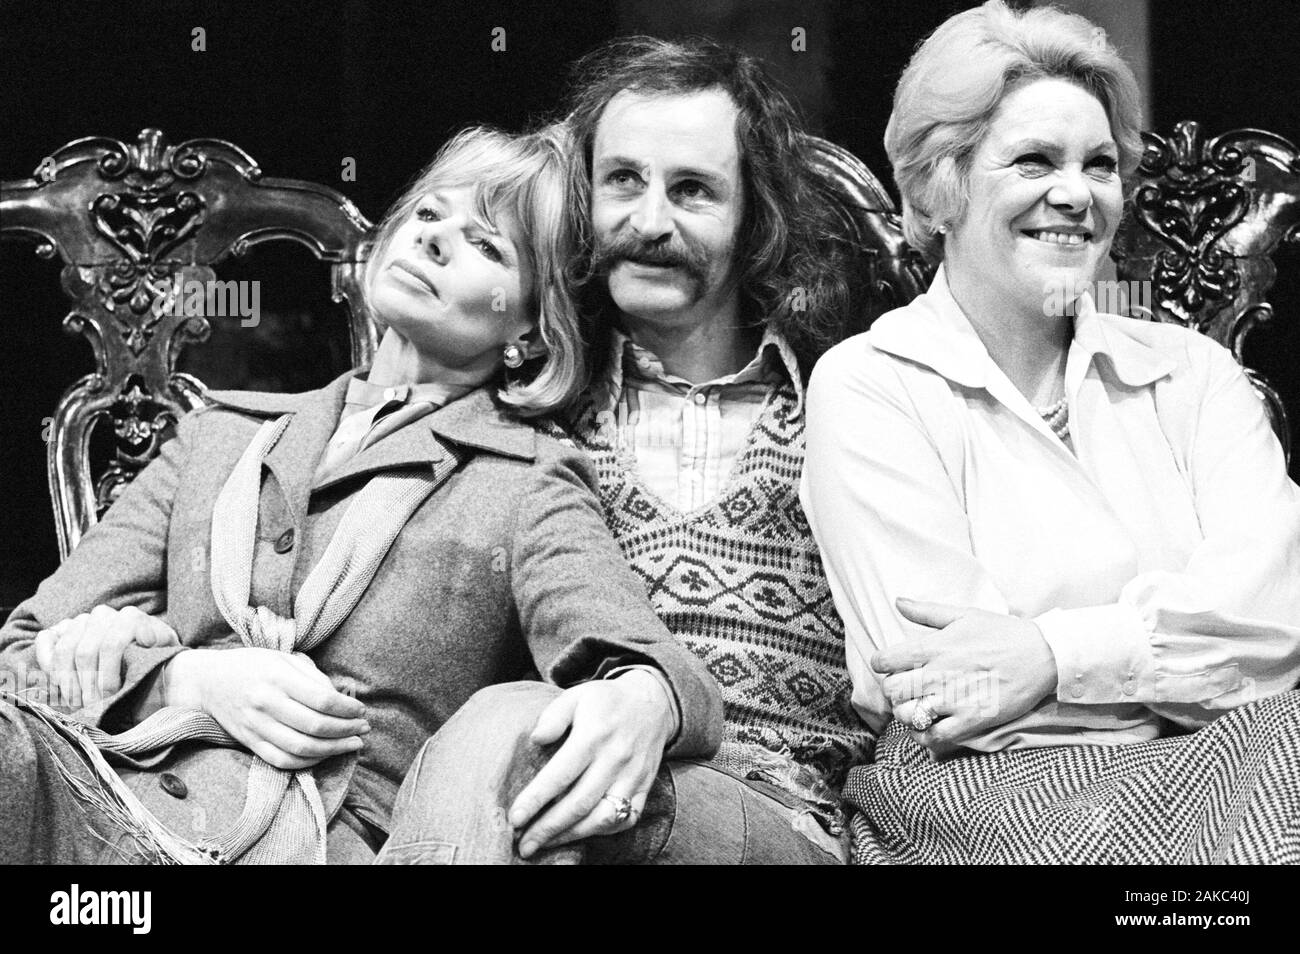 Jill Bennett (Isobel Sands), Max Stafford-Clark (director) and Rachel Roberts (Regine) at a press photocall for THE END OF ME OLD CIGAR by John Osborne at the Greenwich Theatre, London in 1975  Born in Cambridge in 1941  Artistic Director of the Traverse Theatre, Edinburgh from 1968 to 1970, the Royal Court Theatre, London from 1979 to 1993 and Out of Joint touring theatre company from 1993 to 2017 Stock Photo